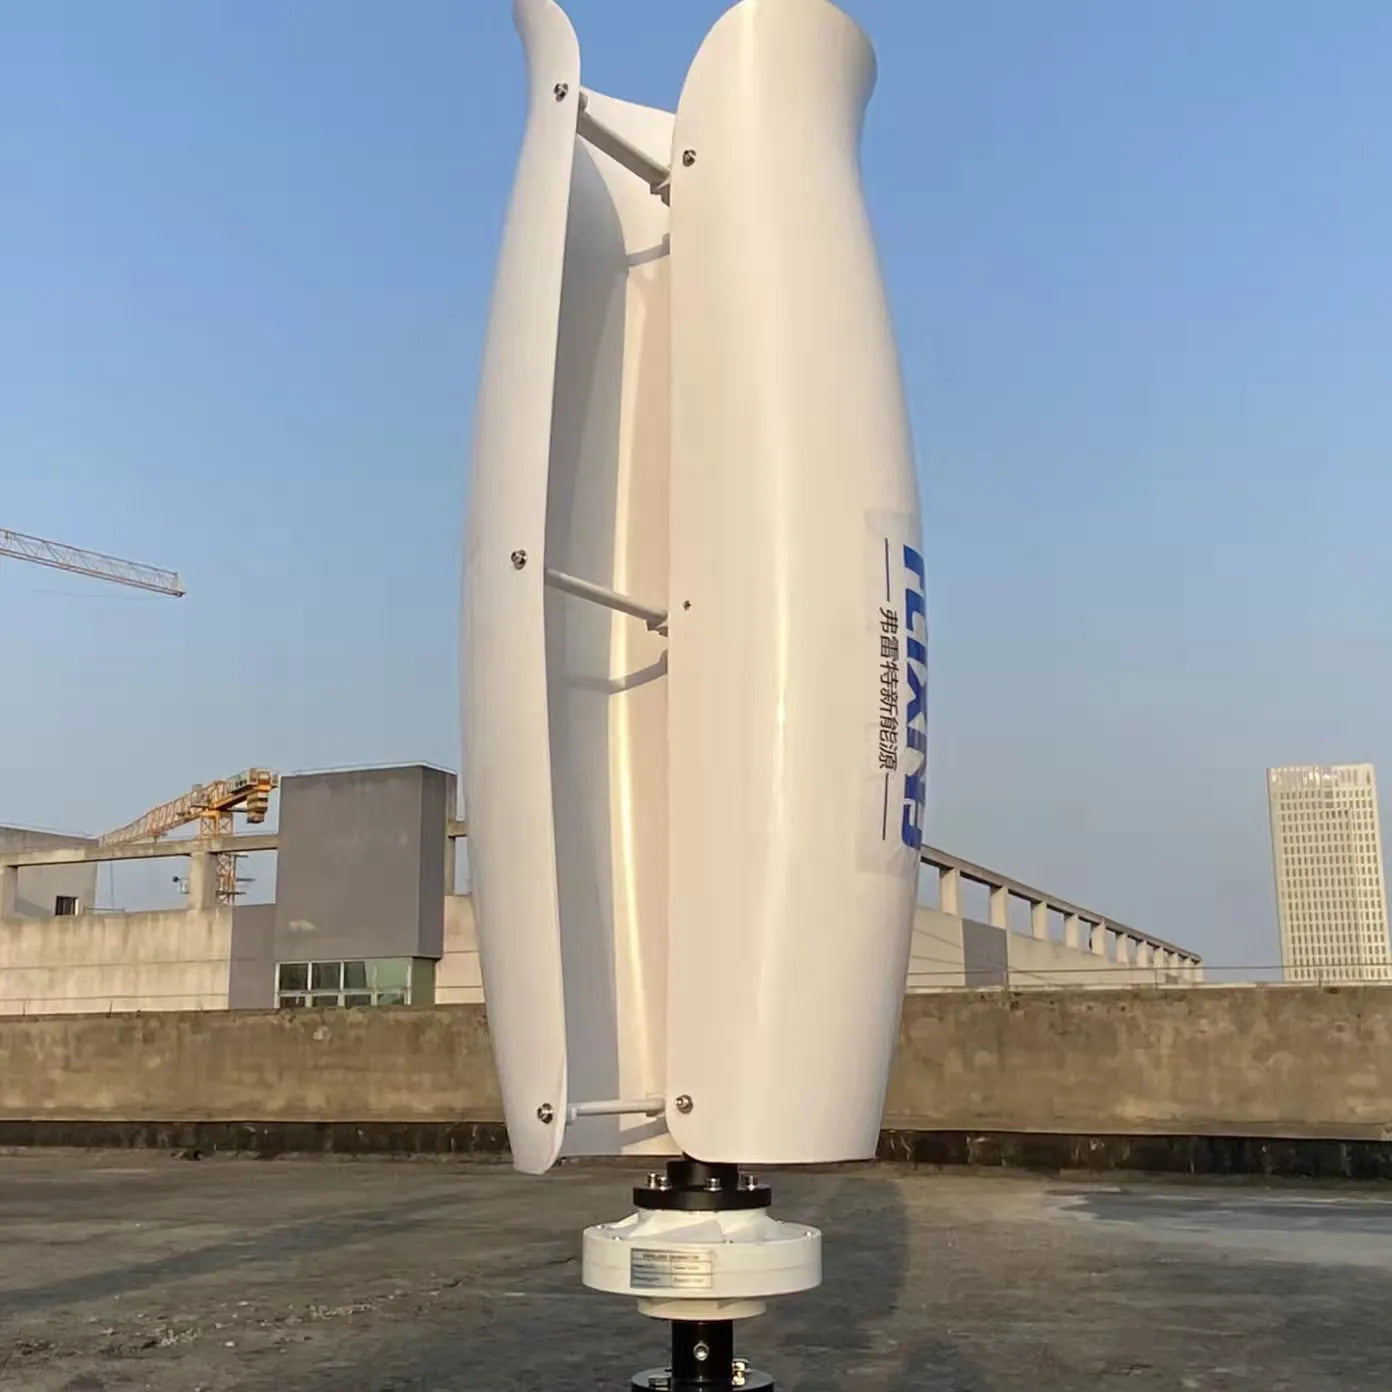 Wind Turbine Free Energy Windmill 10KW 12V-220V Vertical Axis Permanent Maglev Wind Turbine With Hybrid Controller